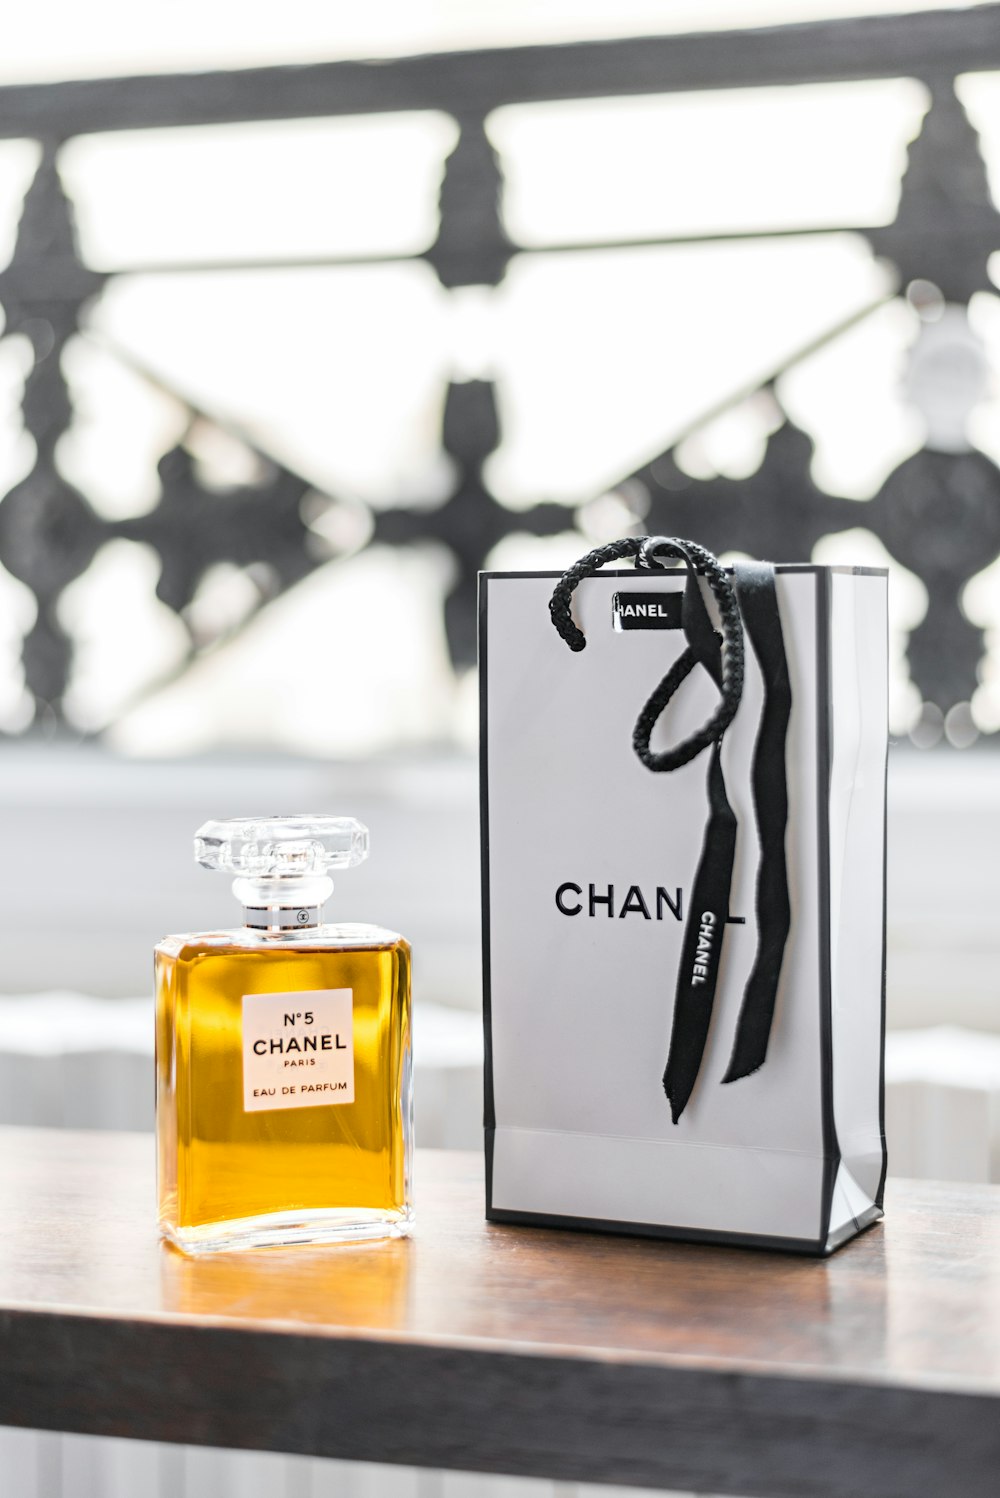 a bottle of chanel on a table next to a bag